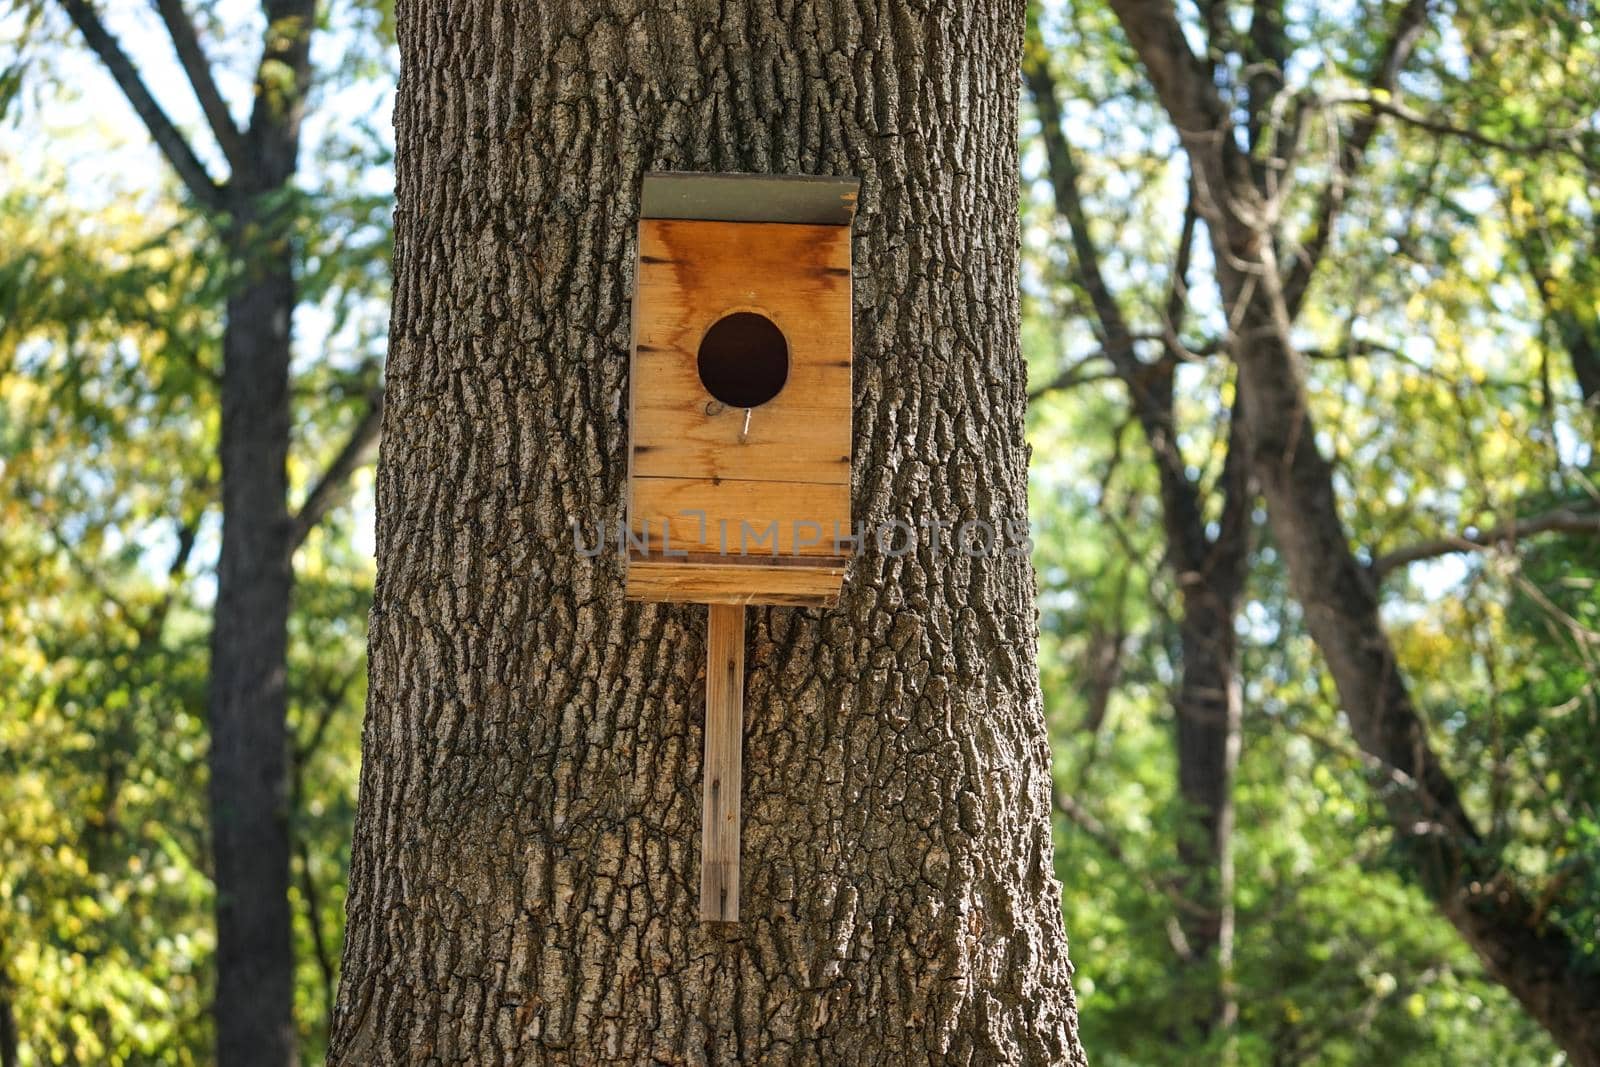 A birdhouse made of plywood on a thick tree trunk and natural background in Sunny day.